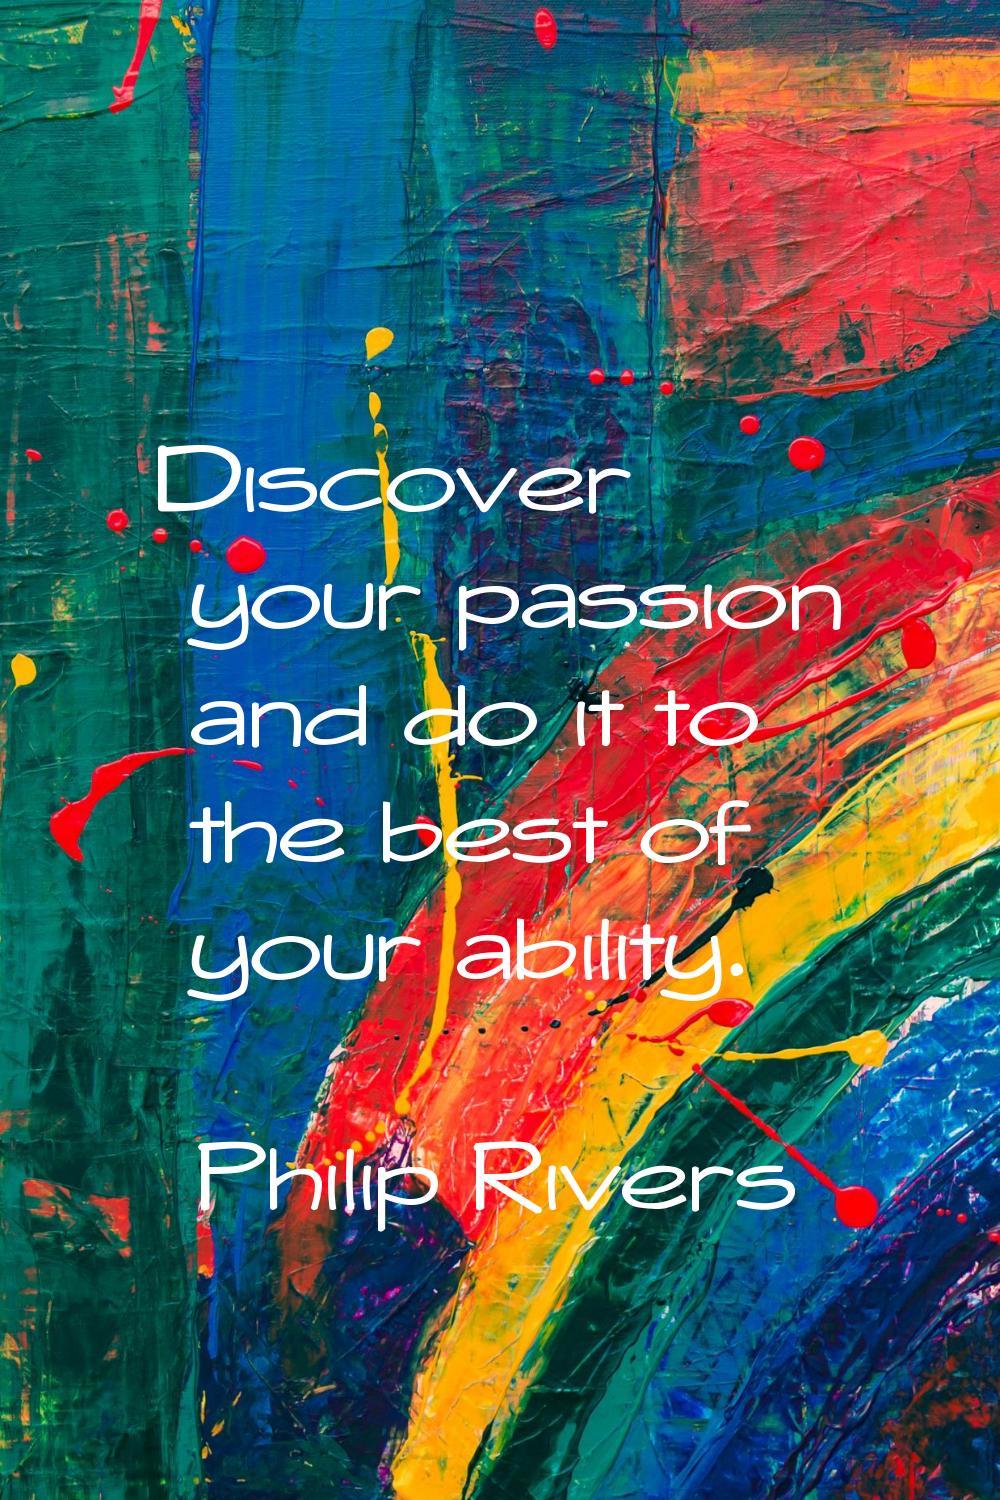 Discover your passion and do it to the best of your ability.